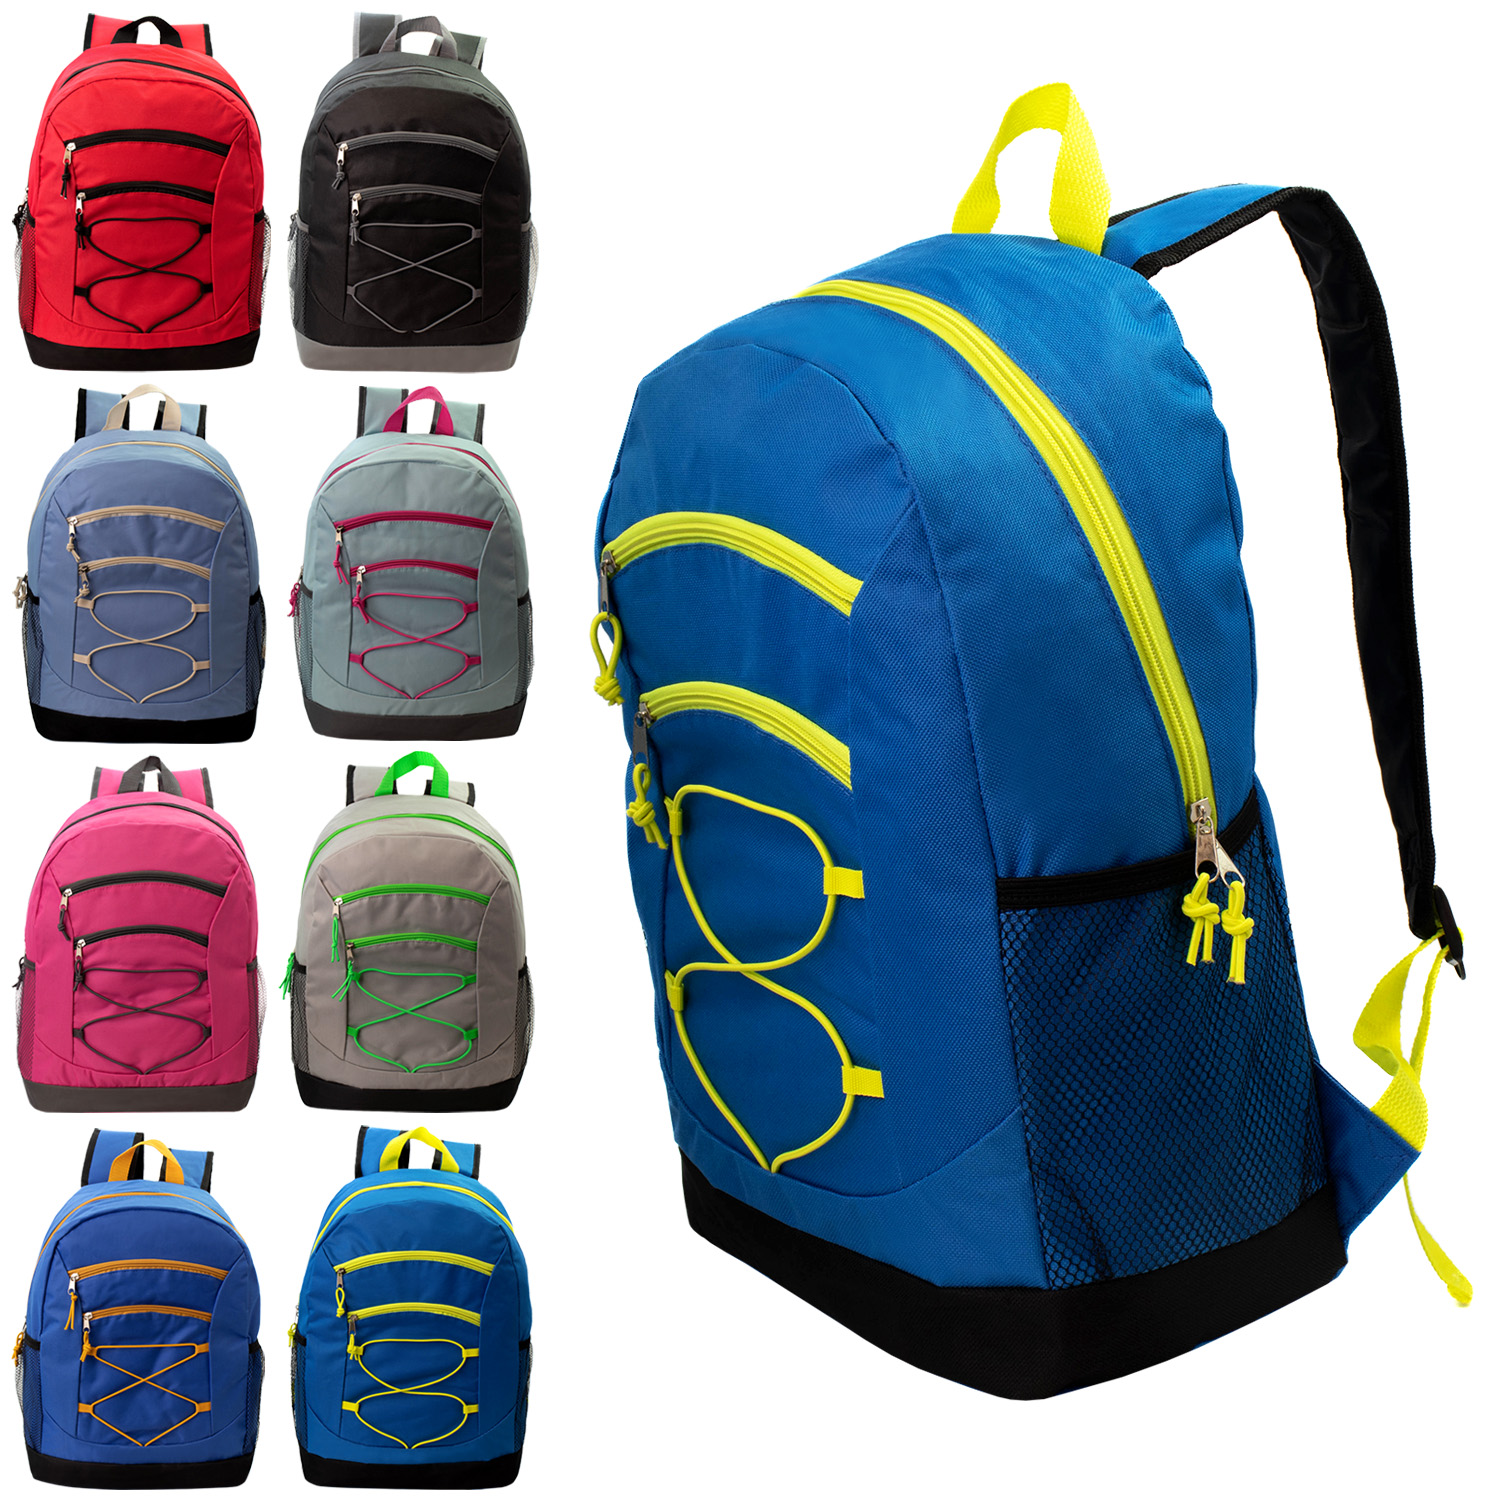 ''17'''' Two Tone Bungee BACKPACKs w/ Adjustable Padded Straps and Mesh Cargo Pockets - Neon & Assorted